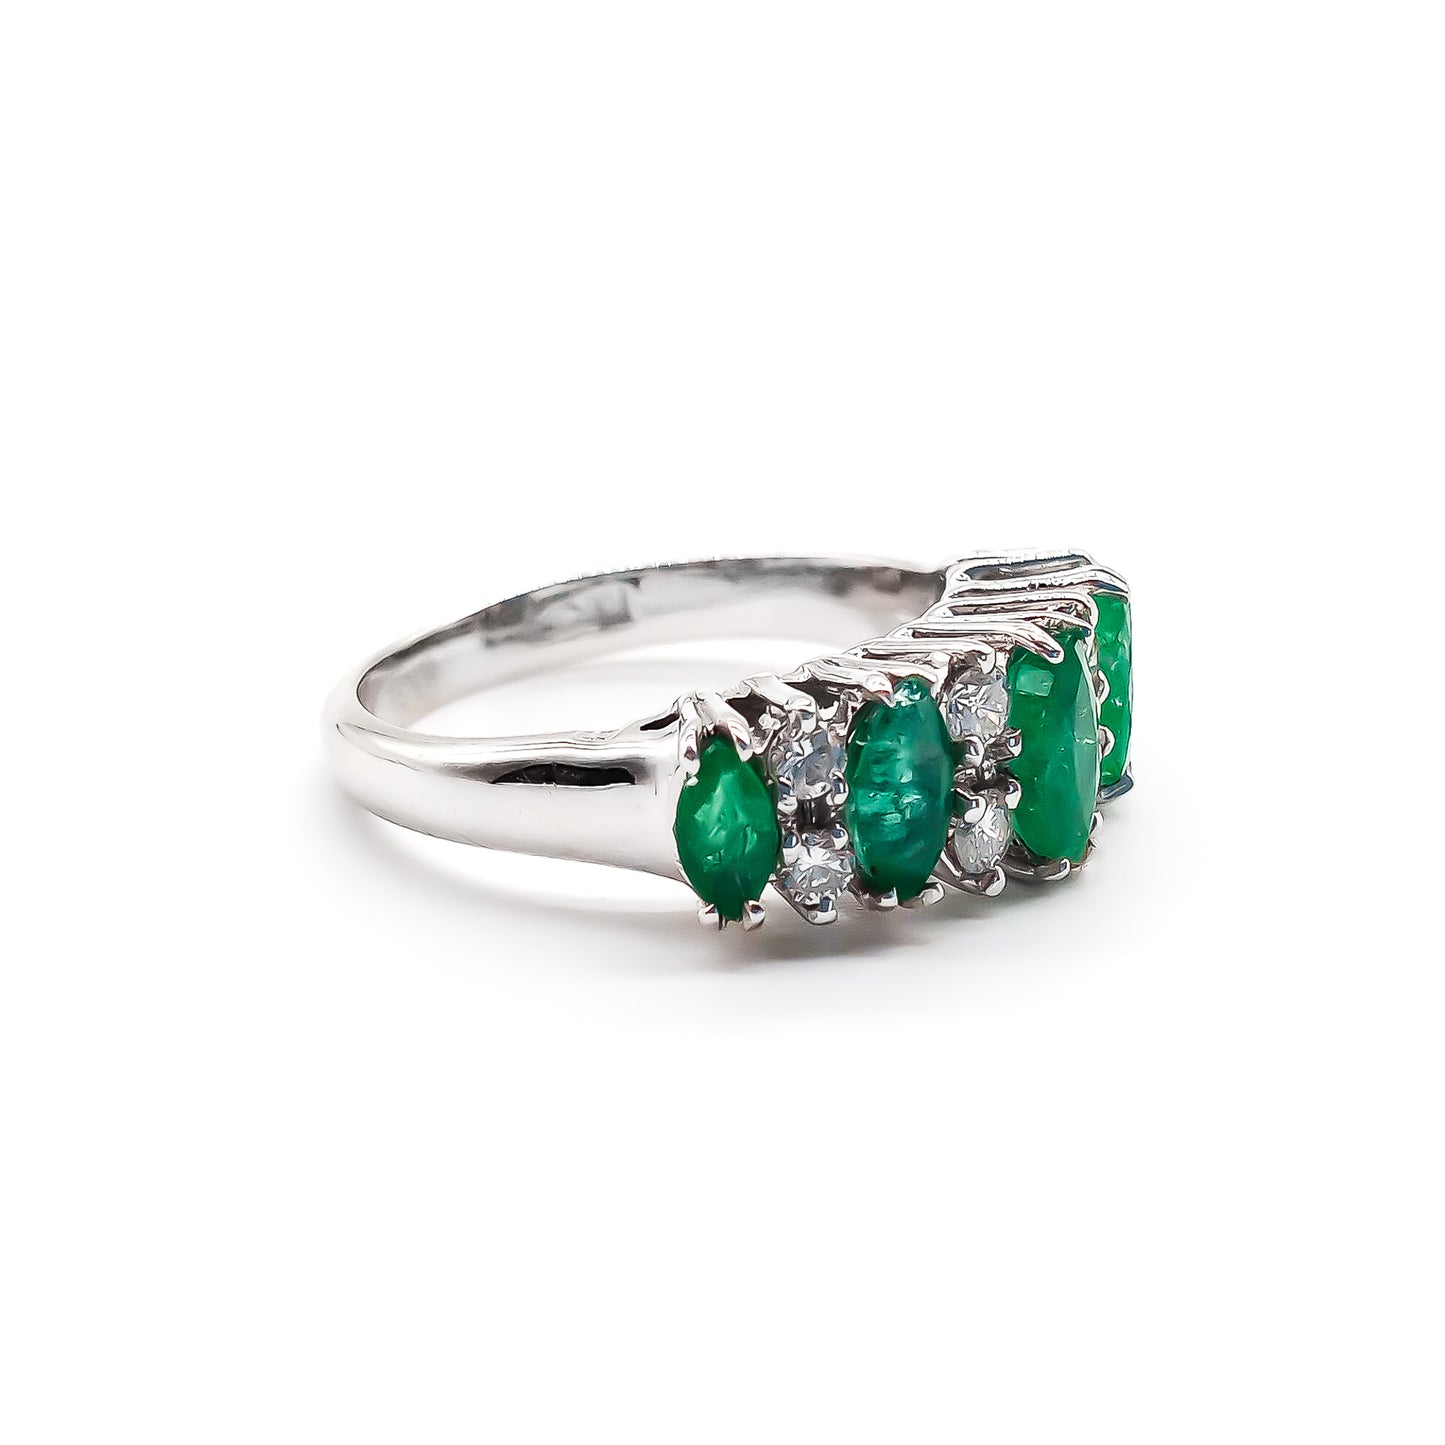 Stunning vintage 18ct white gold ring set with five marquise-cut emeralds and eight round diamonds.